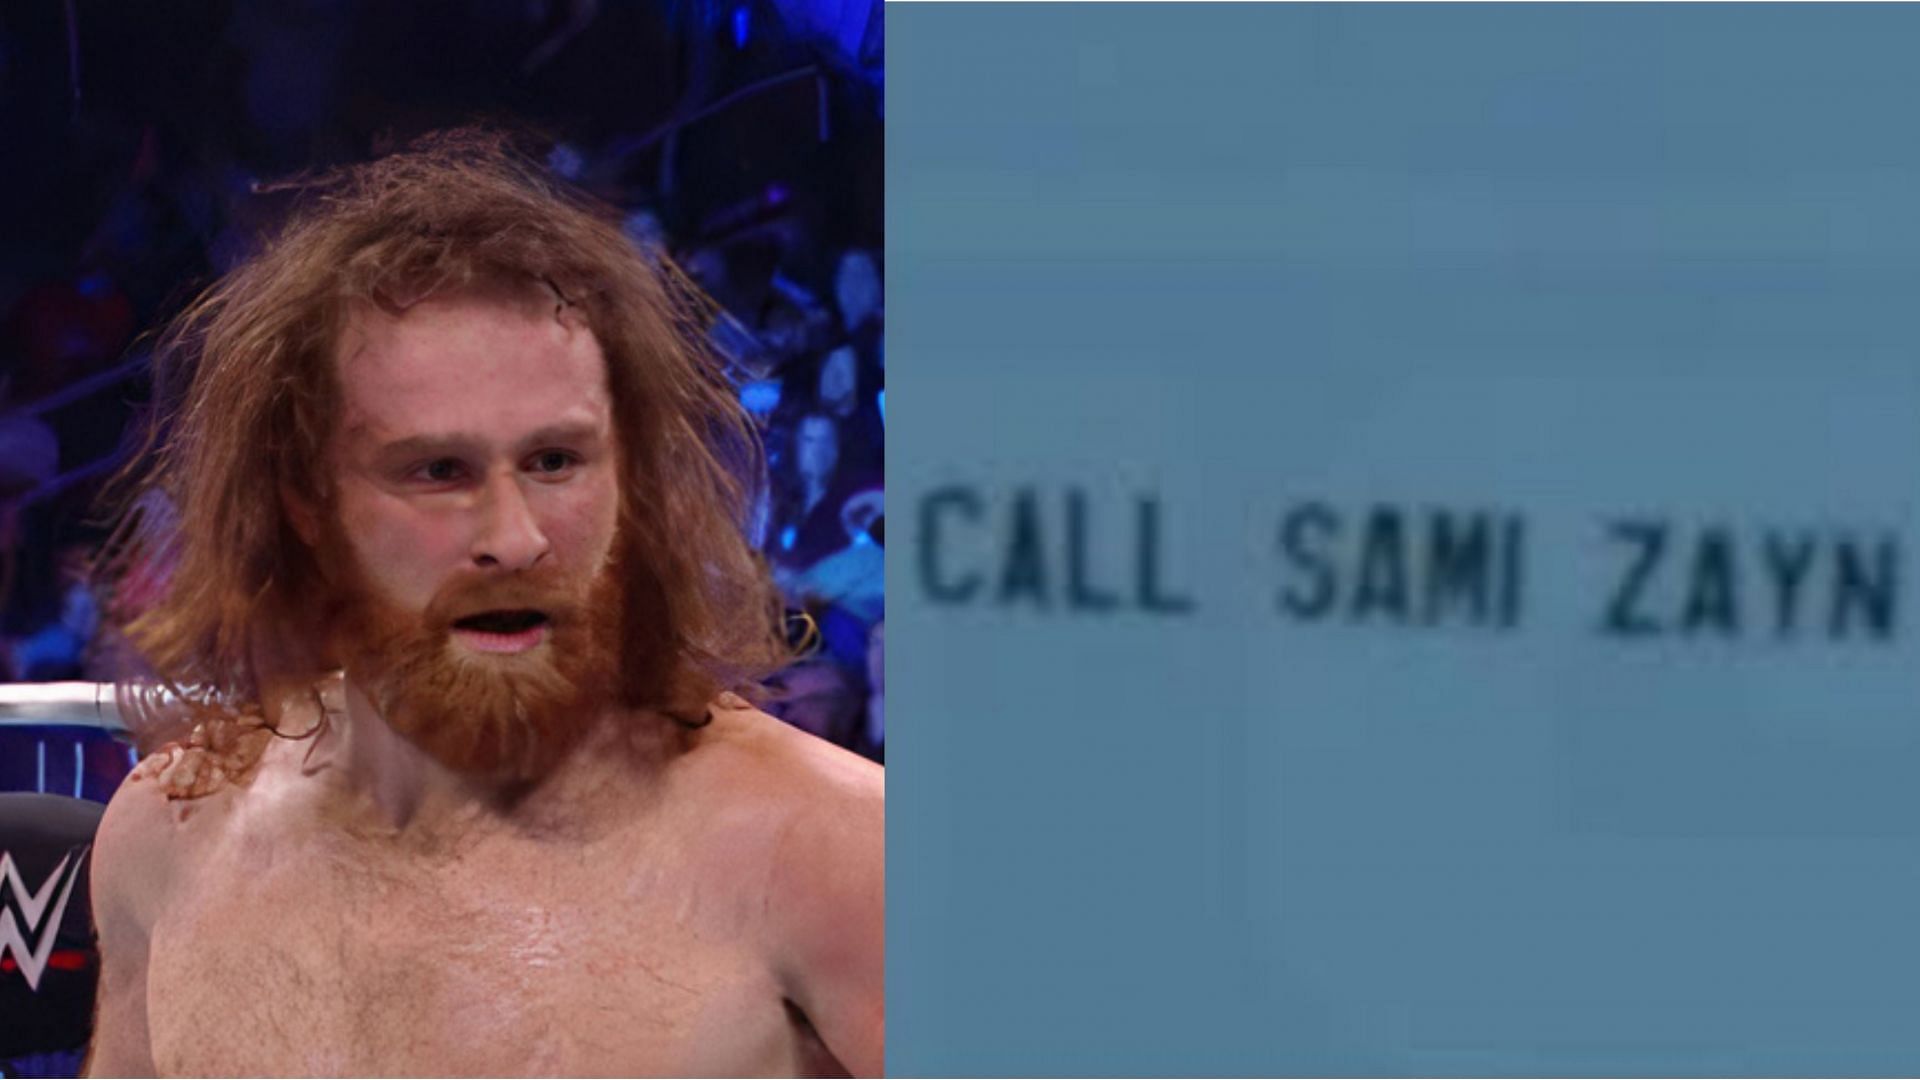 Sami Zayn had his phone number spilled by Johnny Knoxville